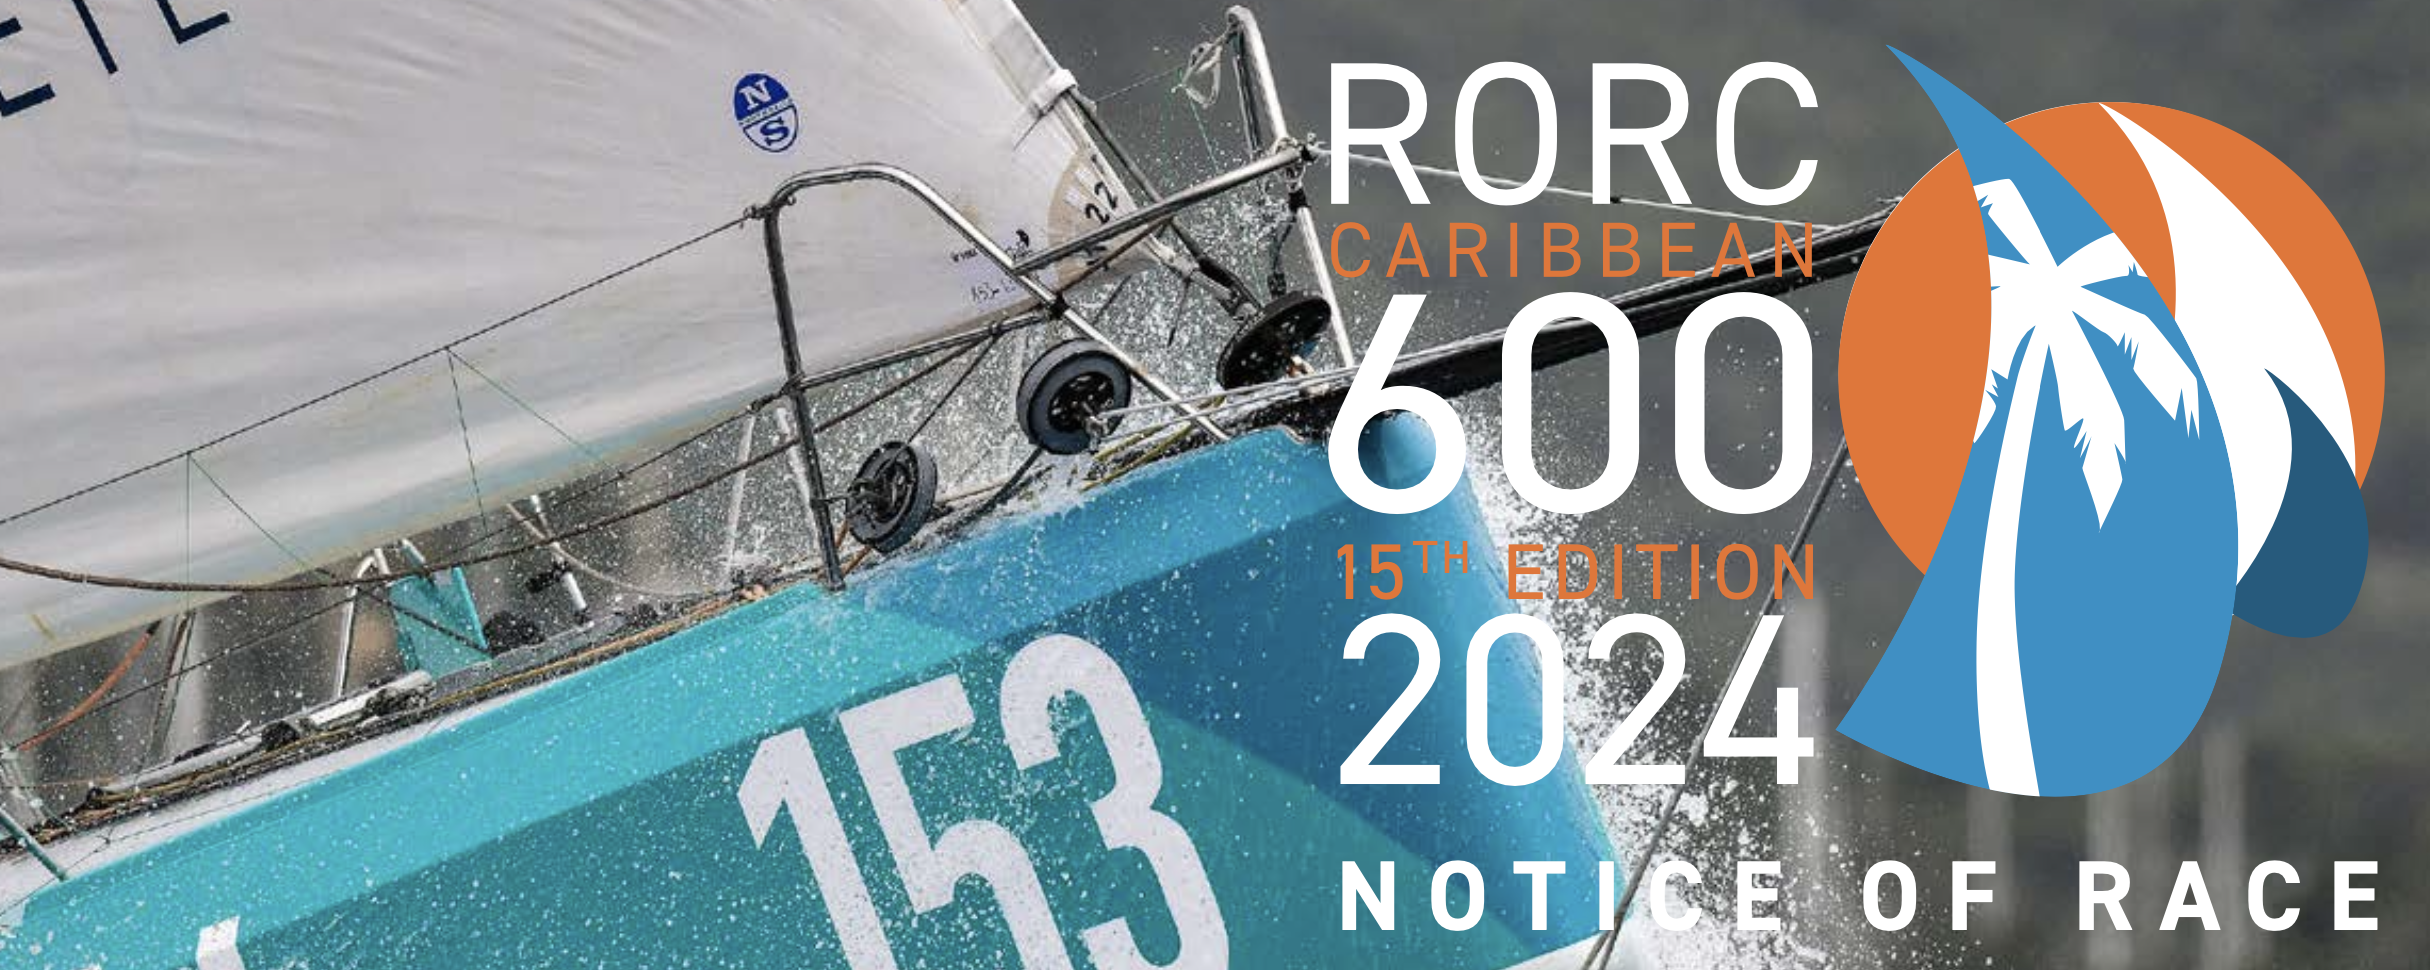 Entry Open | 15TH Edition RORC Caribbean 600